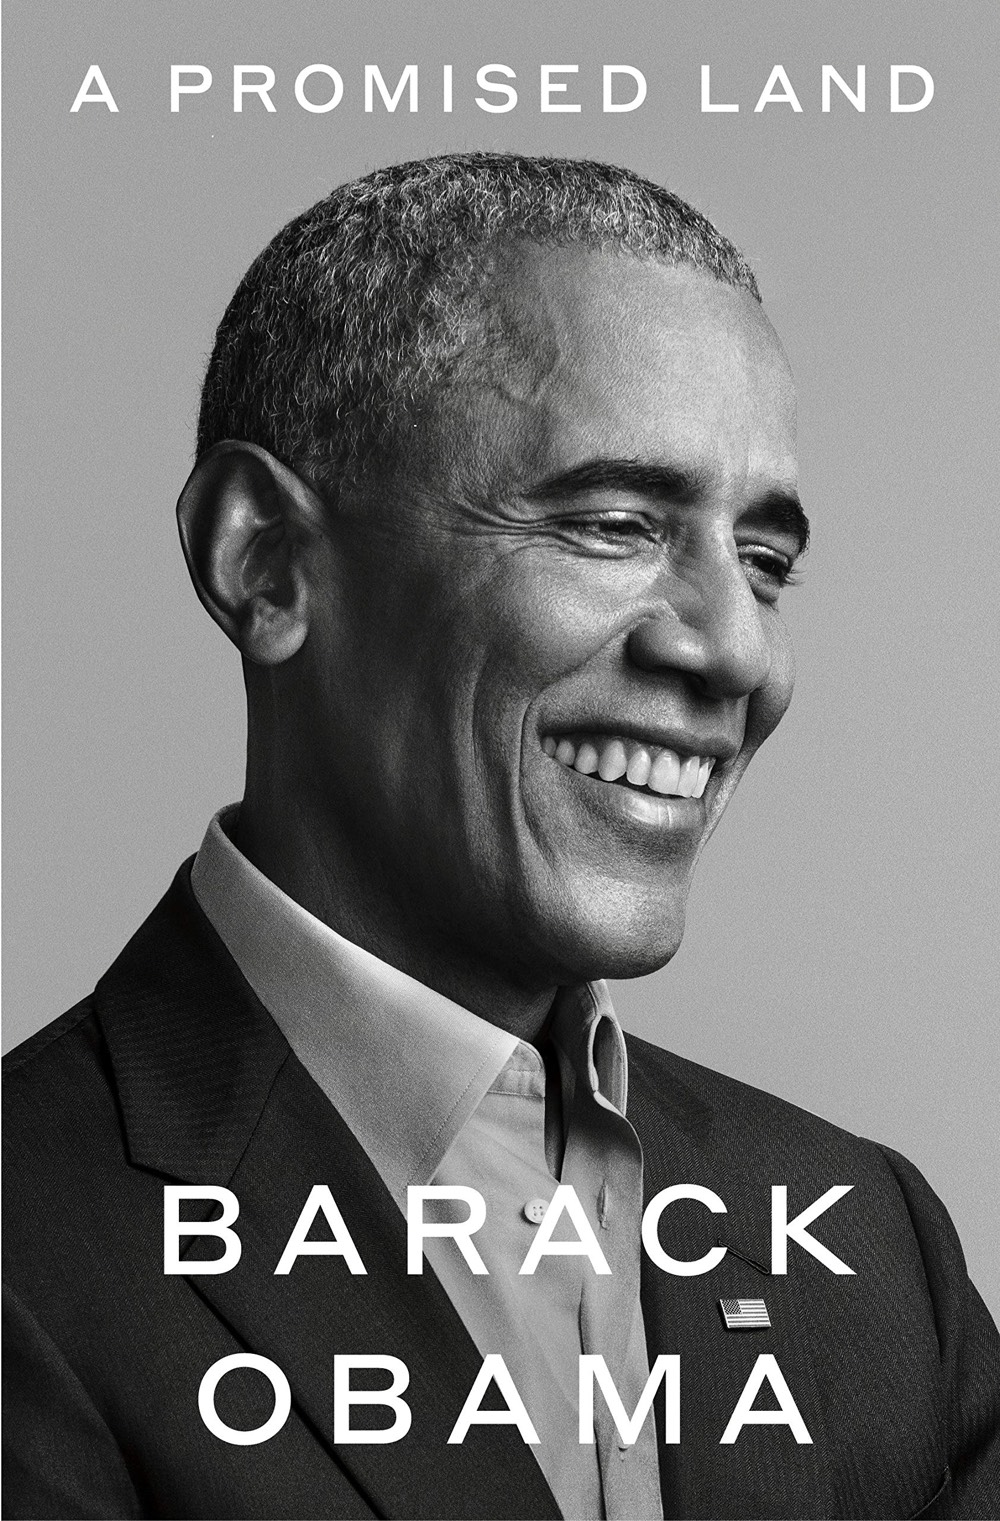 Cover of Barack Obama's book, A Promised Land